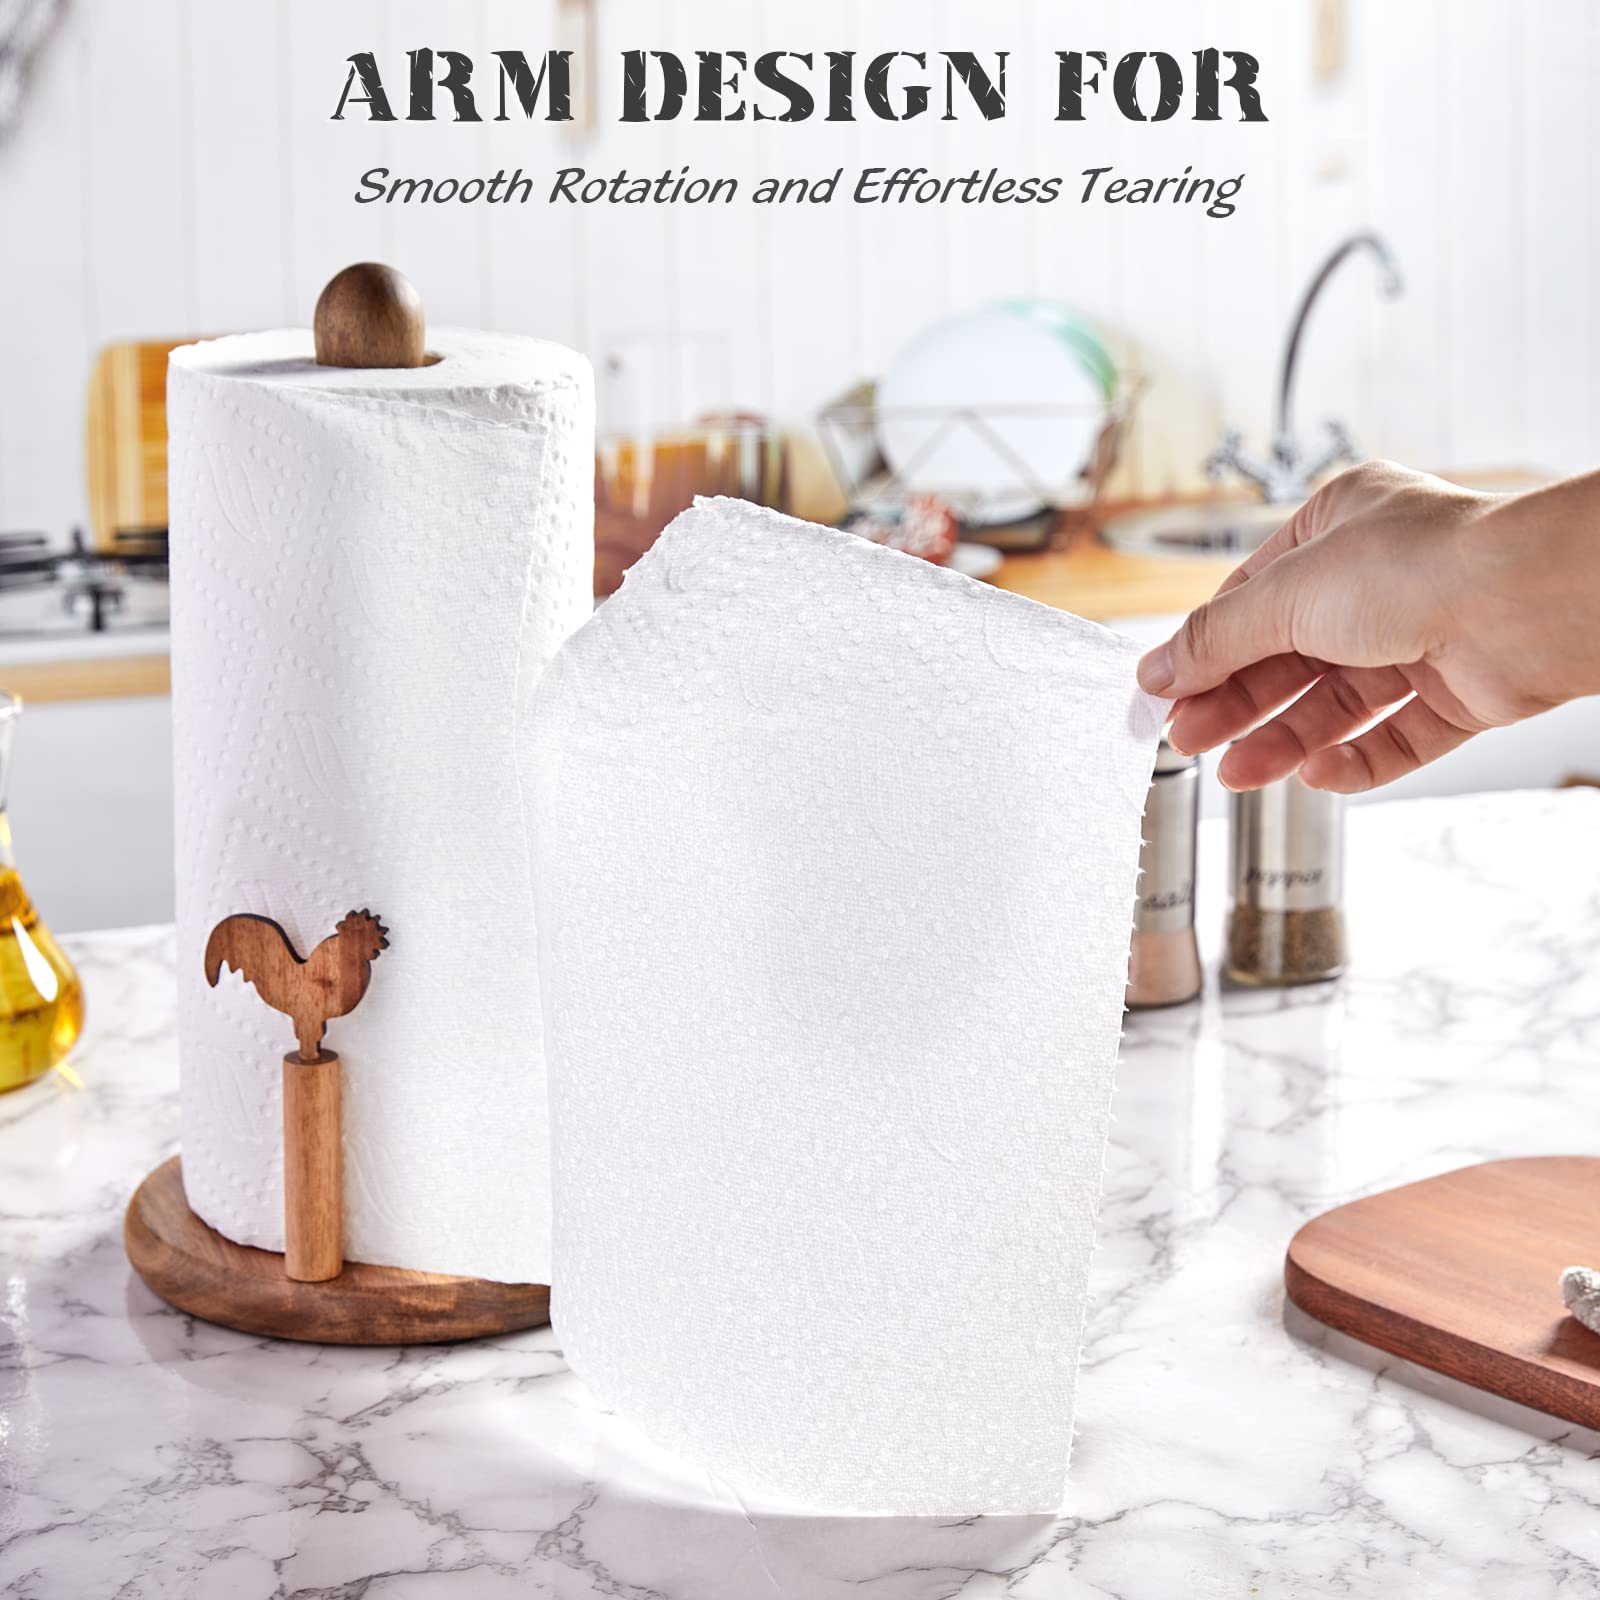 Paper Towel Holder Countertop, Bivvclaz Acacia Wood Paper Towel Holder Stand with Arm and Non Slip Weighted Base, Kitchen Paper Towel Roll Dispenser for Standard & Jumbo Sized Paper Towels